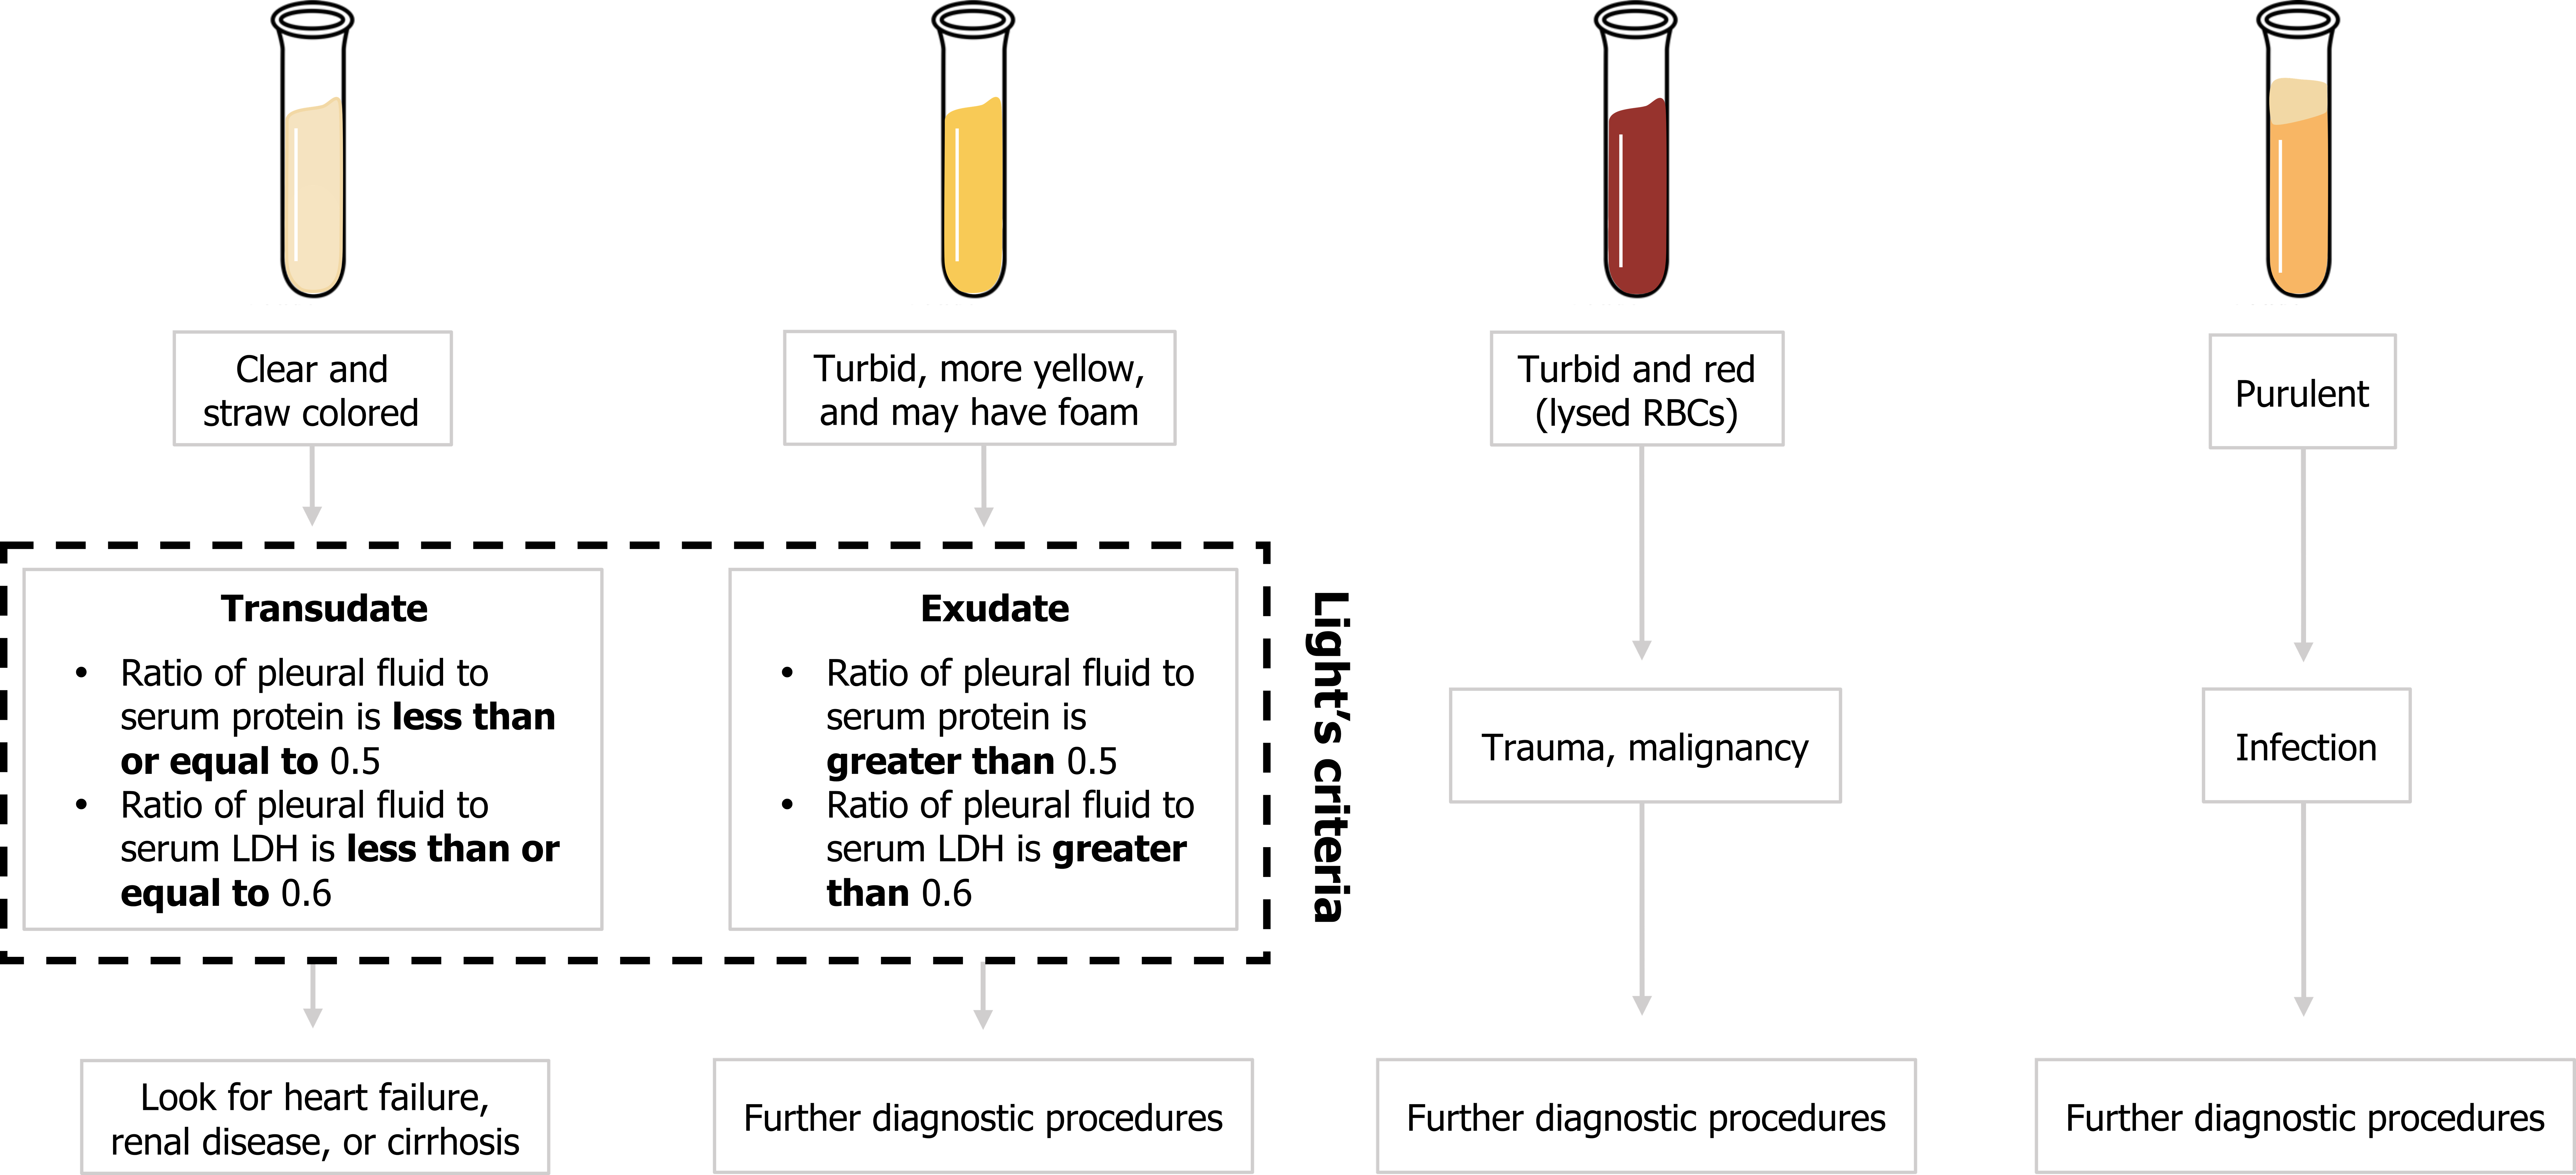 Clear and straw-colored arrow to box labeled transudate with bullets ratio of pleural fluid to serum protein is less than or equal to 0.5, ratio of pleural fluid to serum LDH is less than or equal to 0.6 arrow from box to look for heart failure, renal disease, or cirrhosis. Turbid, more yellow, and may have foam arrow to box labeled exudate with bullets ratio of pleural fluid to serum protein is greater than 0.5, ratio of pleural fluid to serum LDH is greater than 0.6 arrow from box to further diagnostic procedures. Turbid and red (lysed RBCs) arrow to trauma, malignancy arrow to further diagnostic procedures. Purulent arrow to infection arrow to further diagnostic procedures.